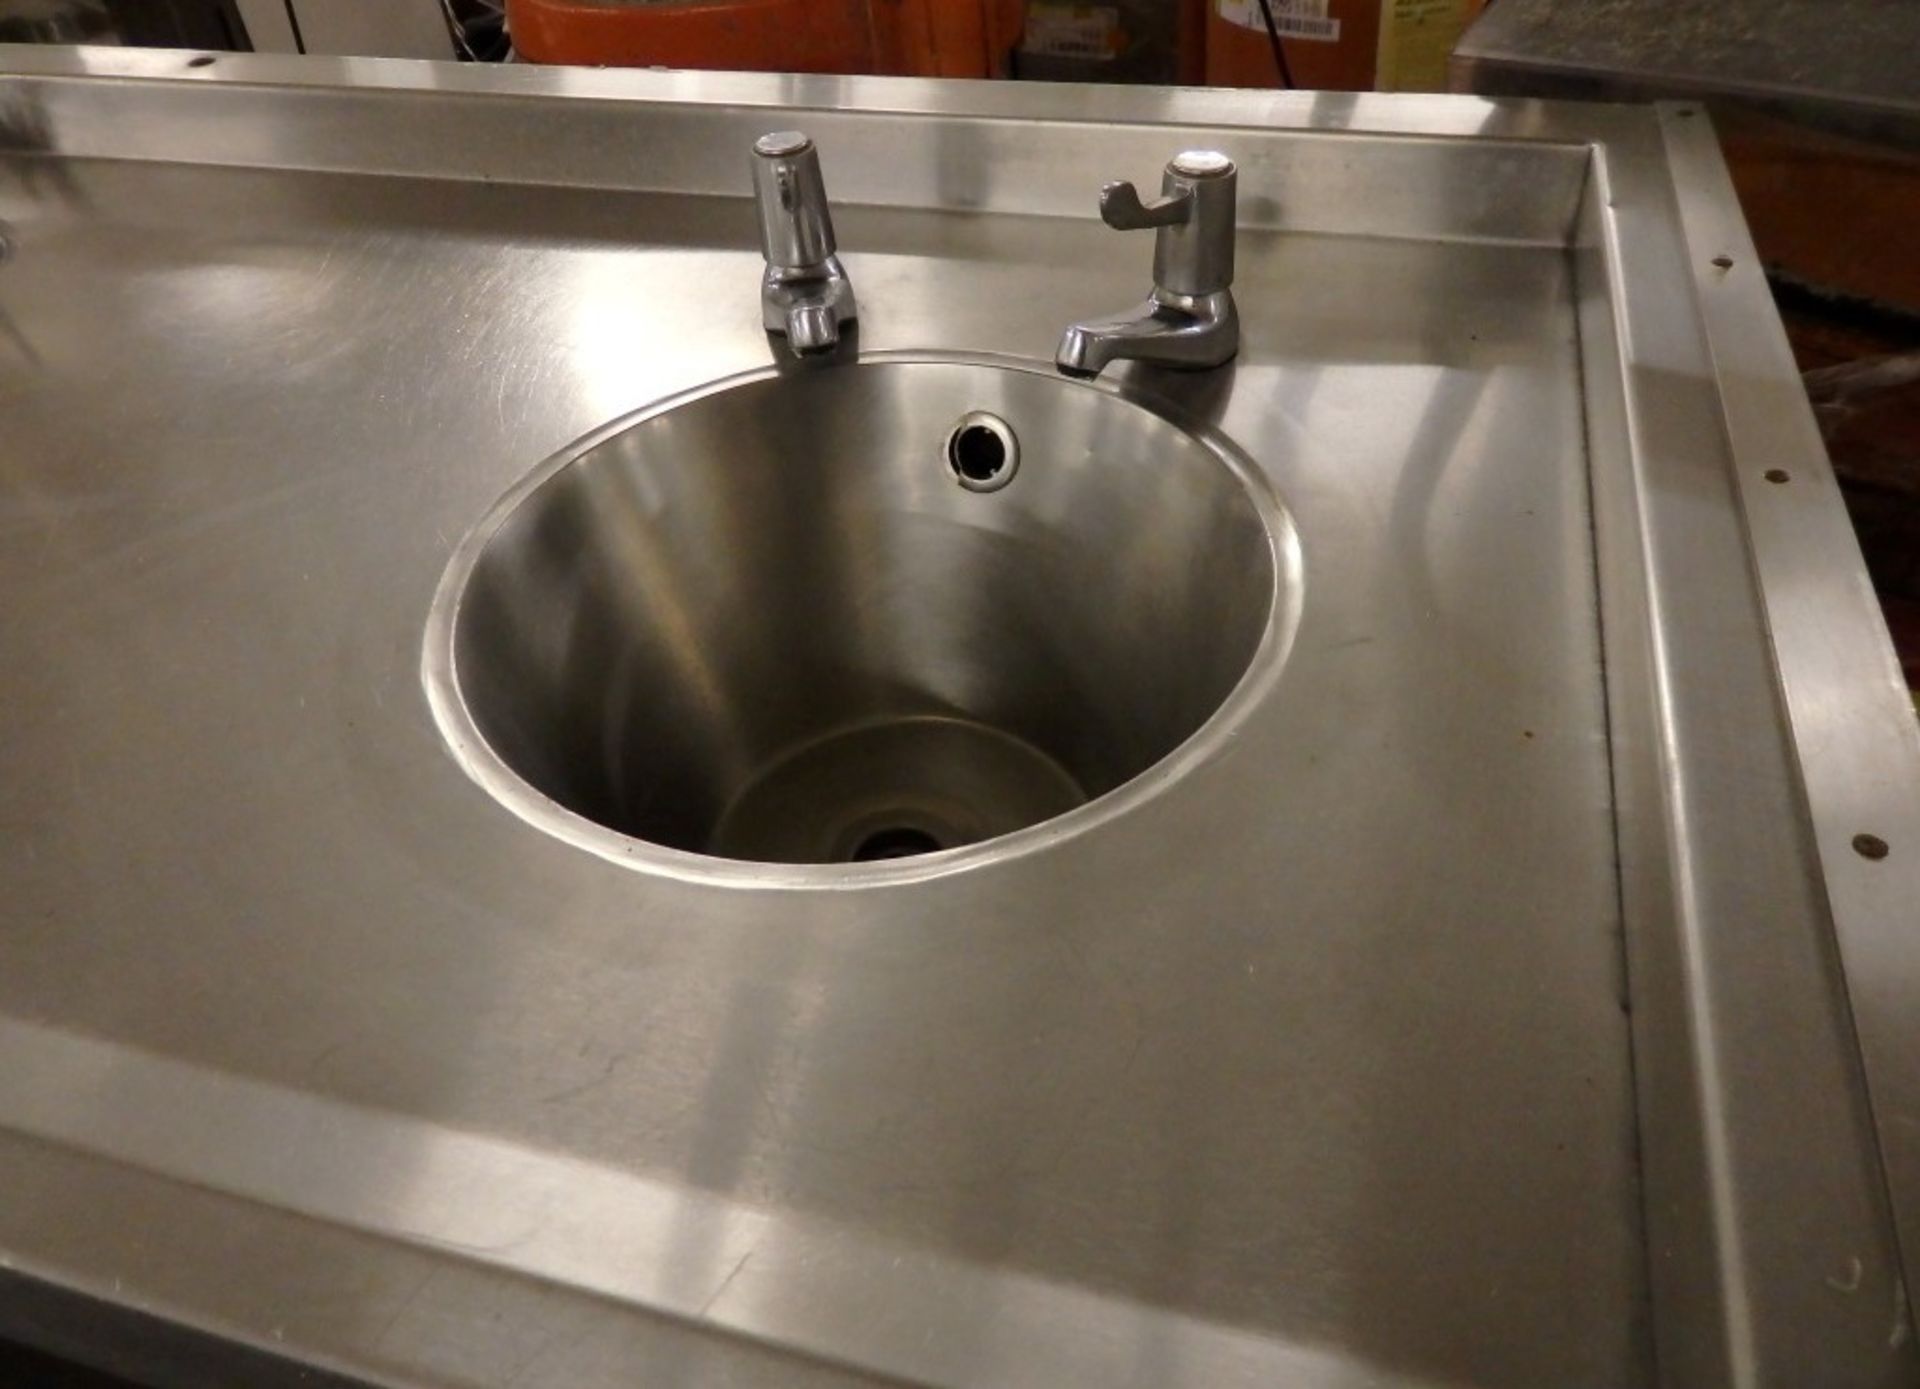 1 x Large Triple Bowl Stainless Steel Sink Unit, With 3-Door Storage - Dimensions: W272 x D65 x - Image 21 of 26